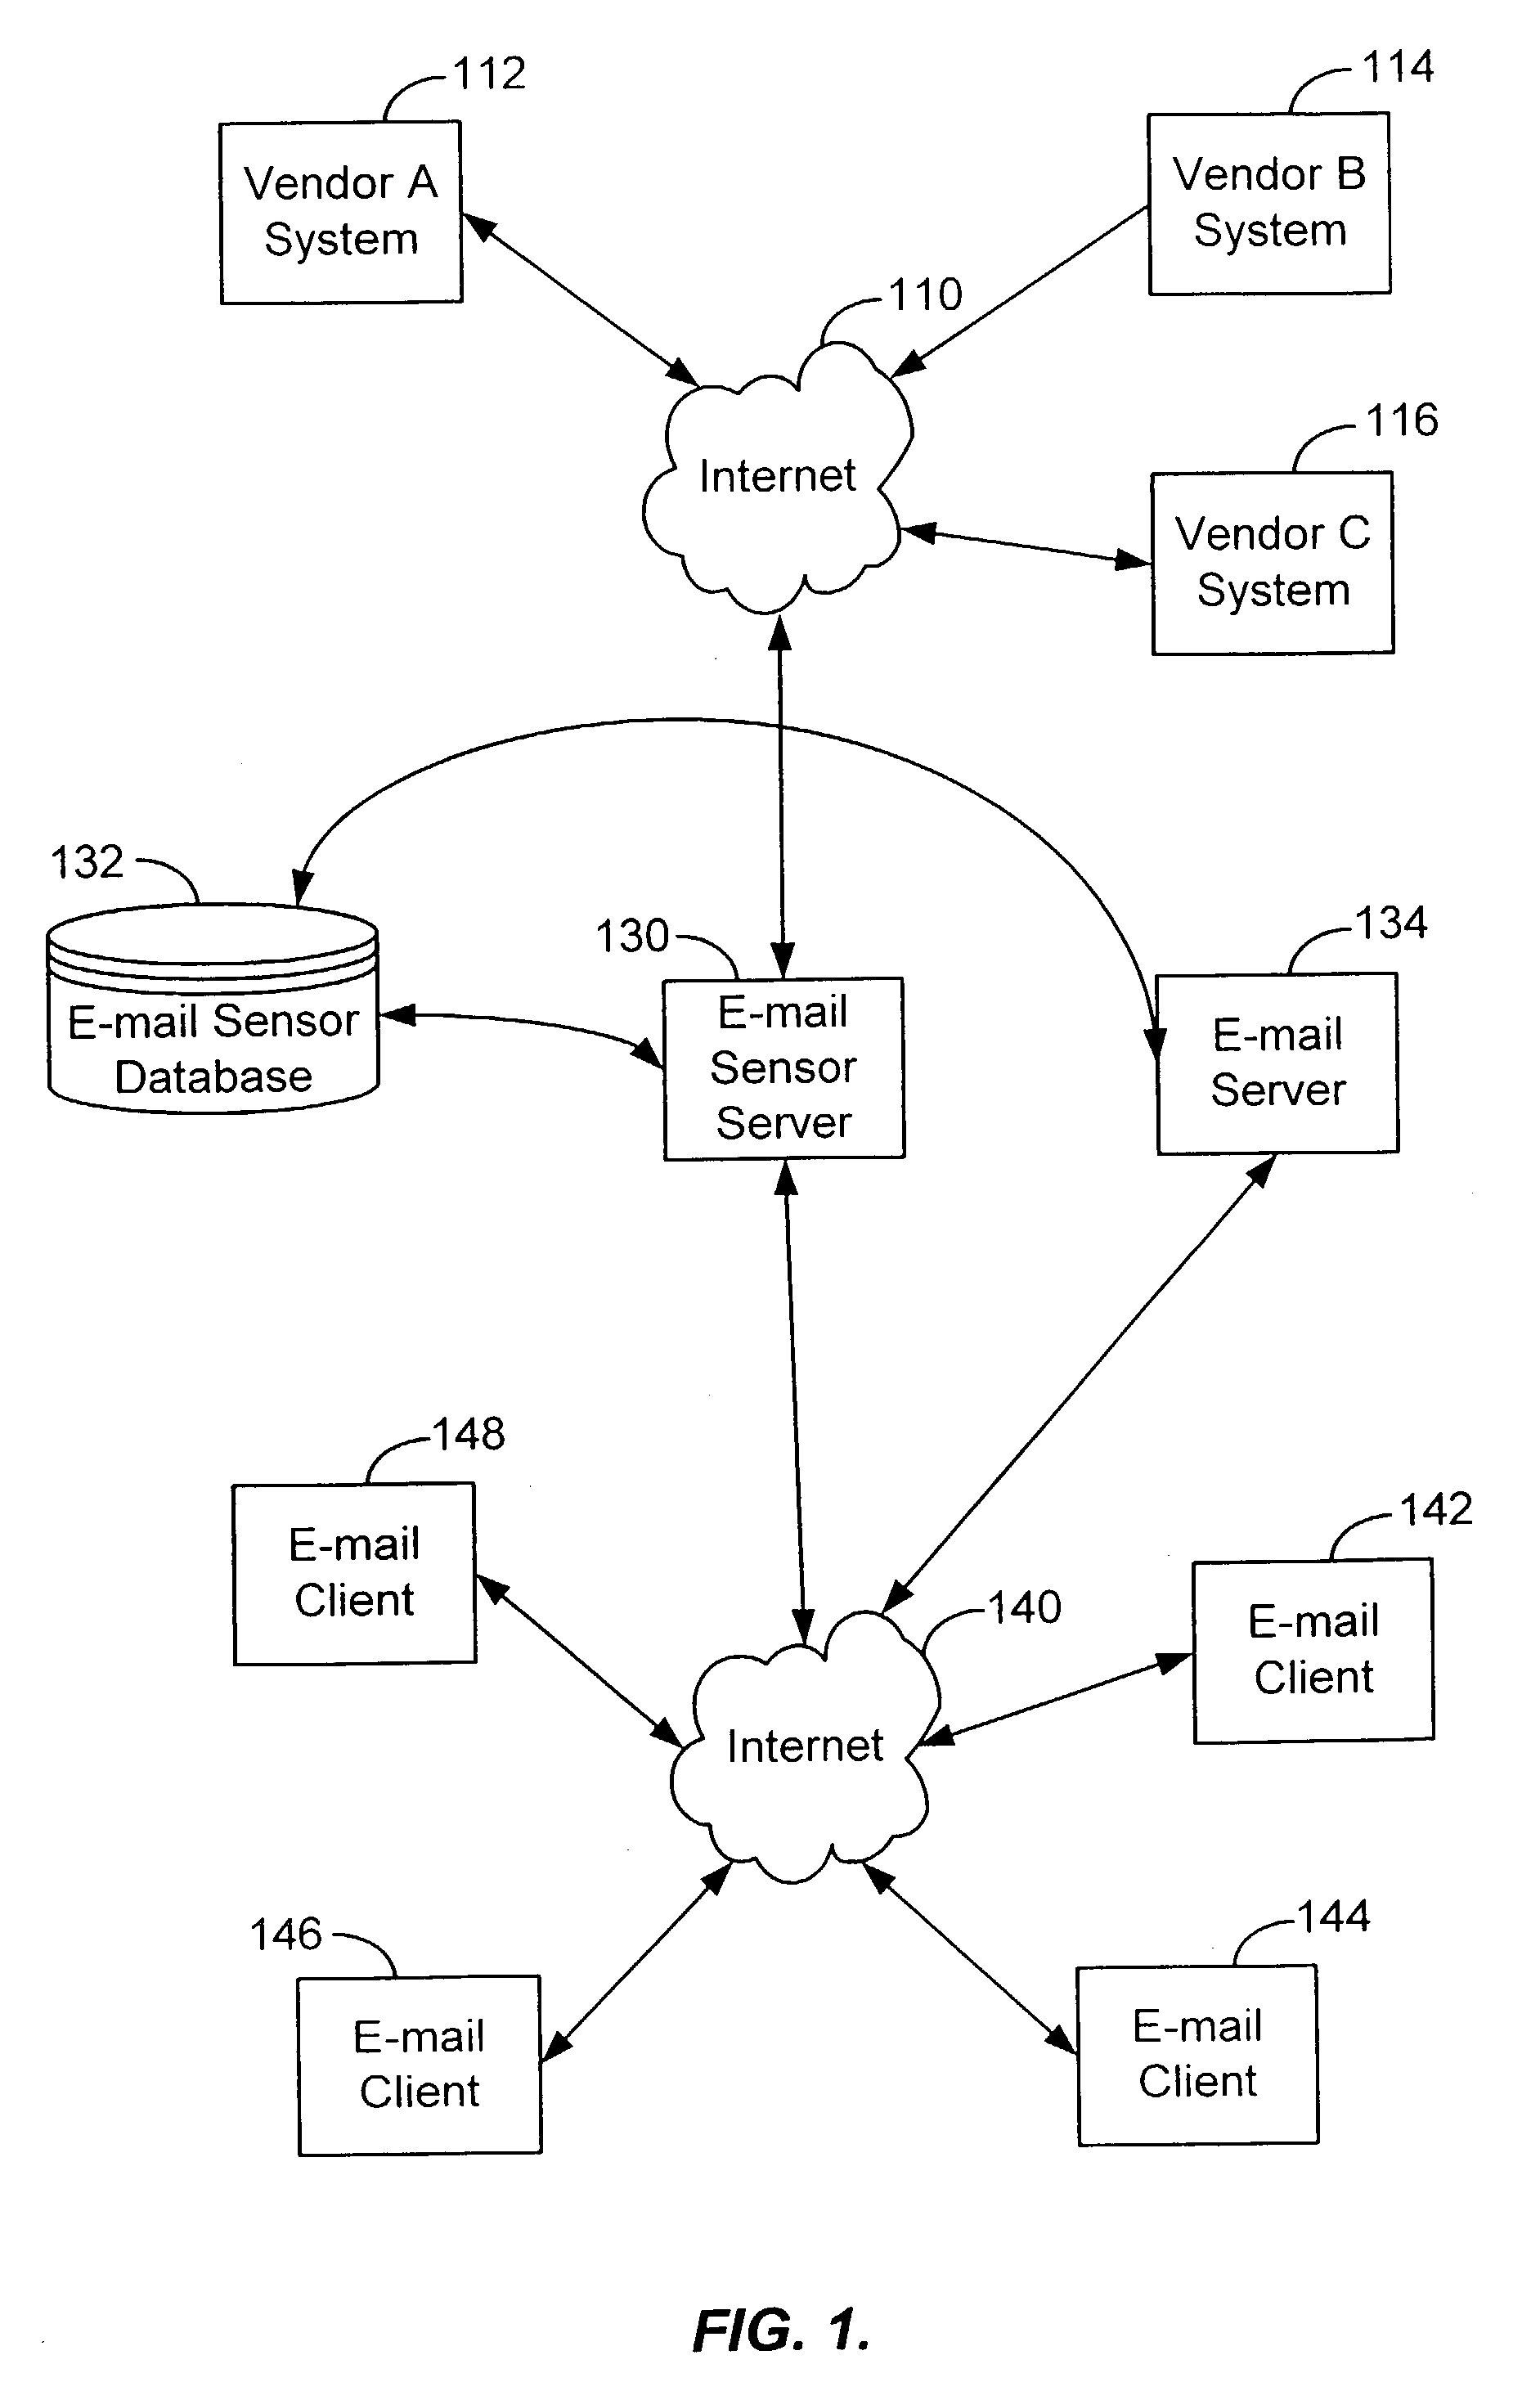 Method and system for remotely sensing the file formats processed by an e-mail client